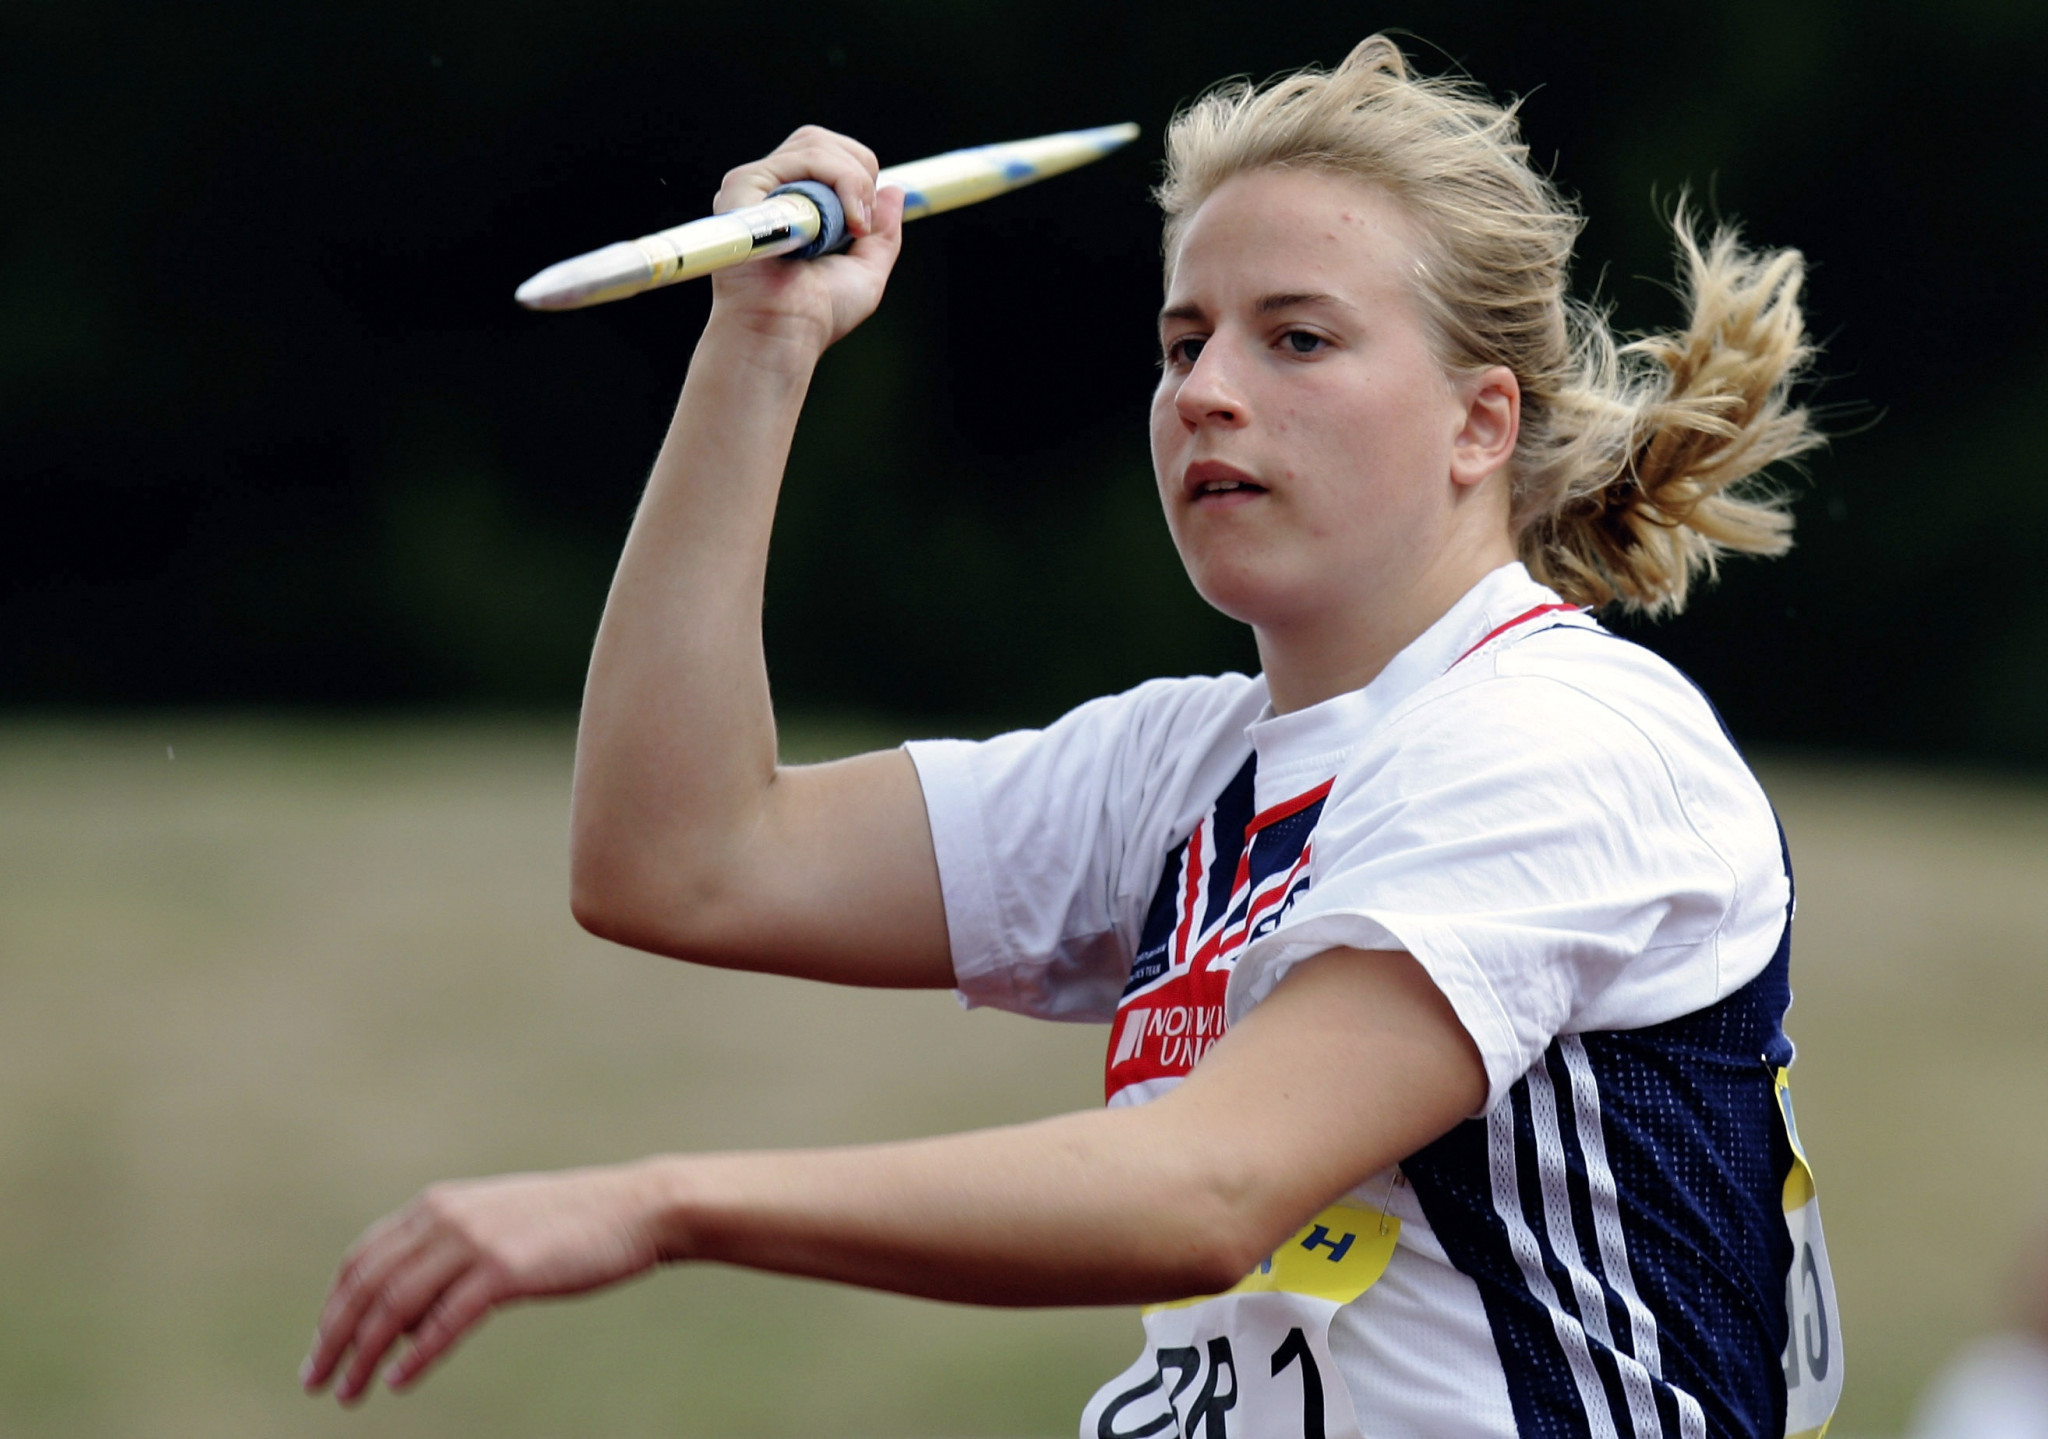 British Javelin thrower handed four-year ban following positive drugs test